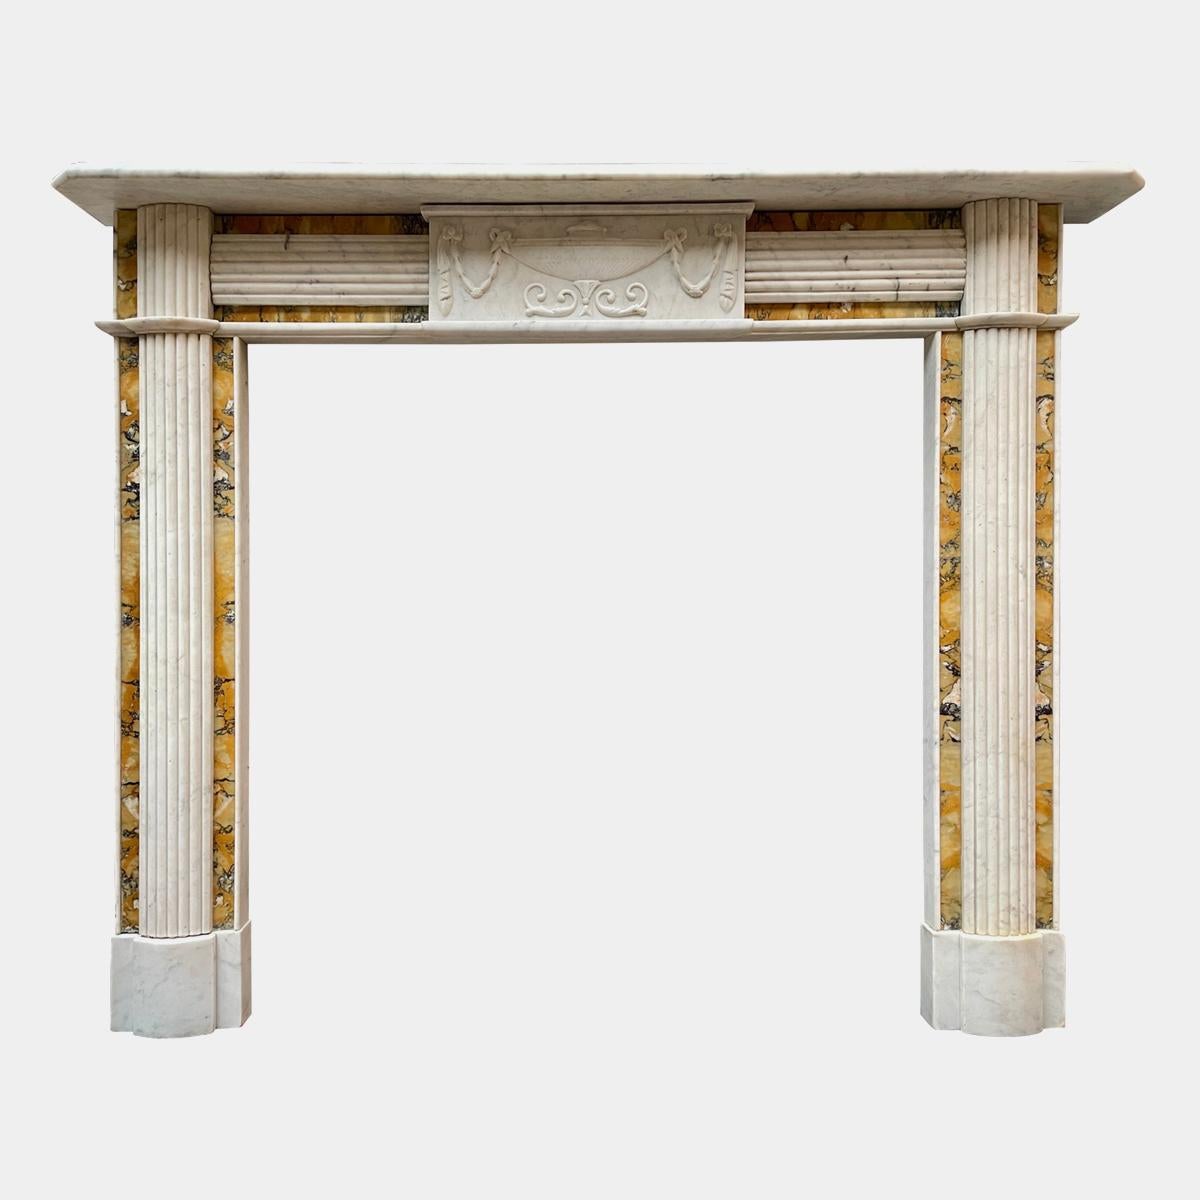 An Irish antique fireplace from the Regency period in Italian Carrara and Siena marbles. The jambs with demi lune reeded panels on book matched Sienna ingrounds, surmounted by conforming endblocks. The frieze with a carved centre tablet of urn and